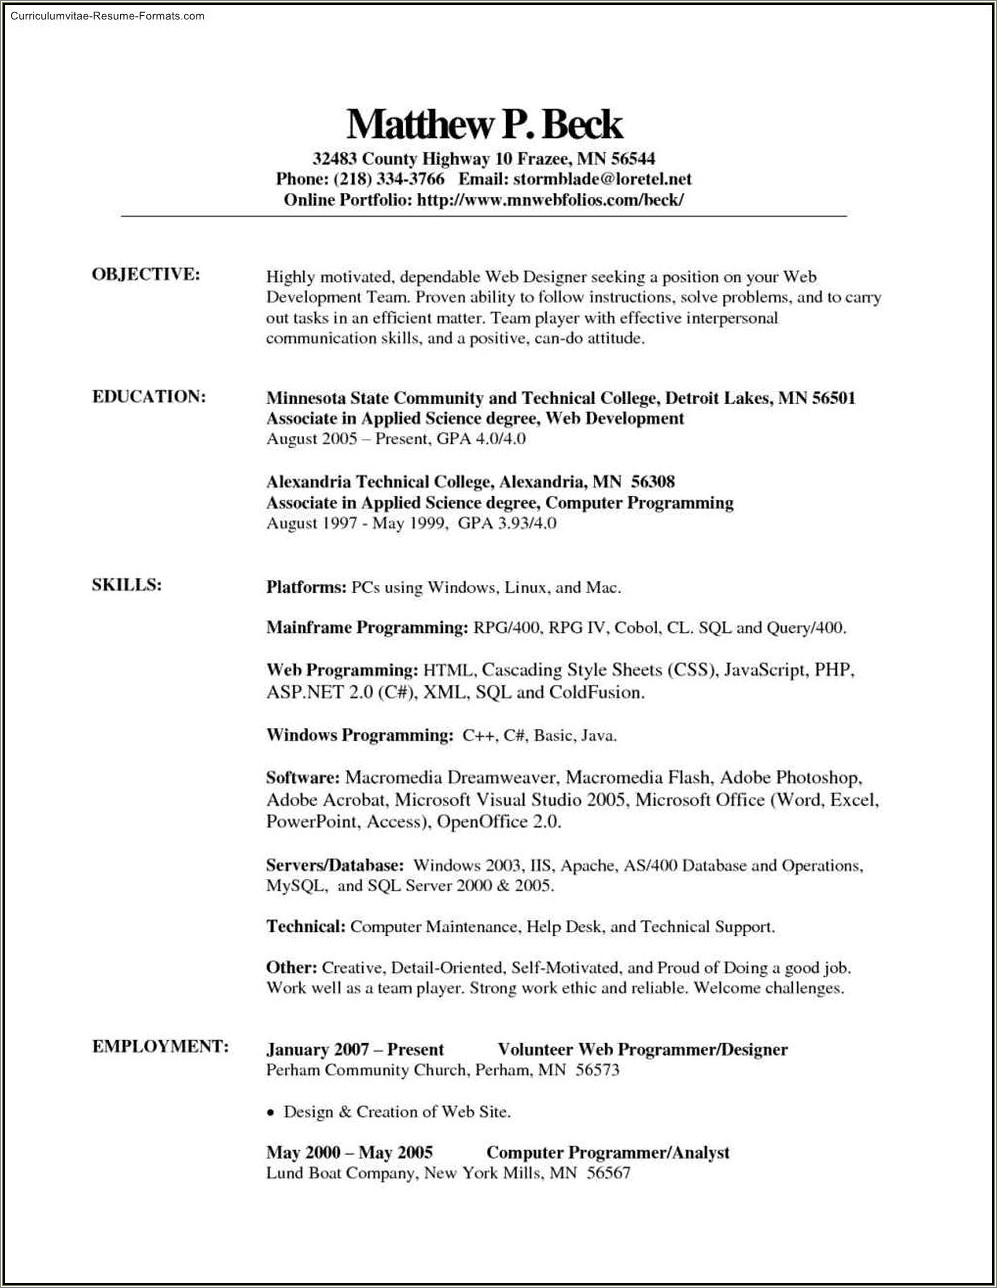 free-resume-templates-for-ms-word-2007-resume-example-gallery